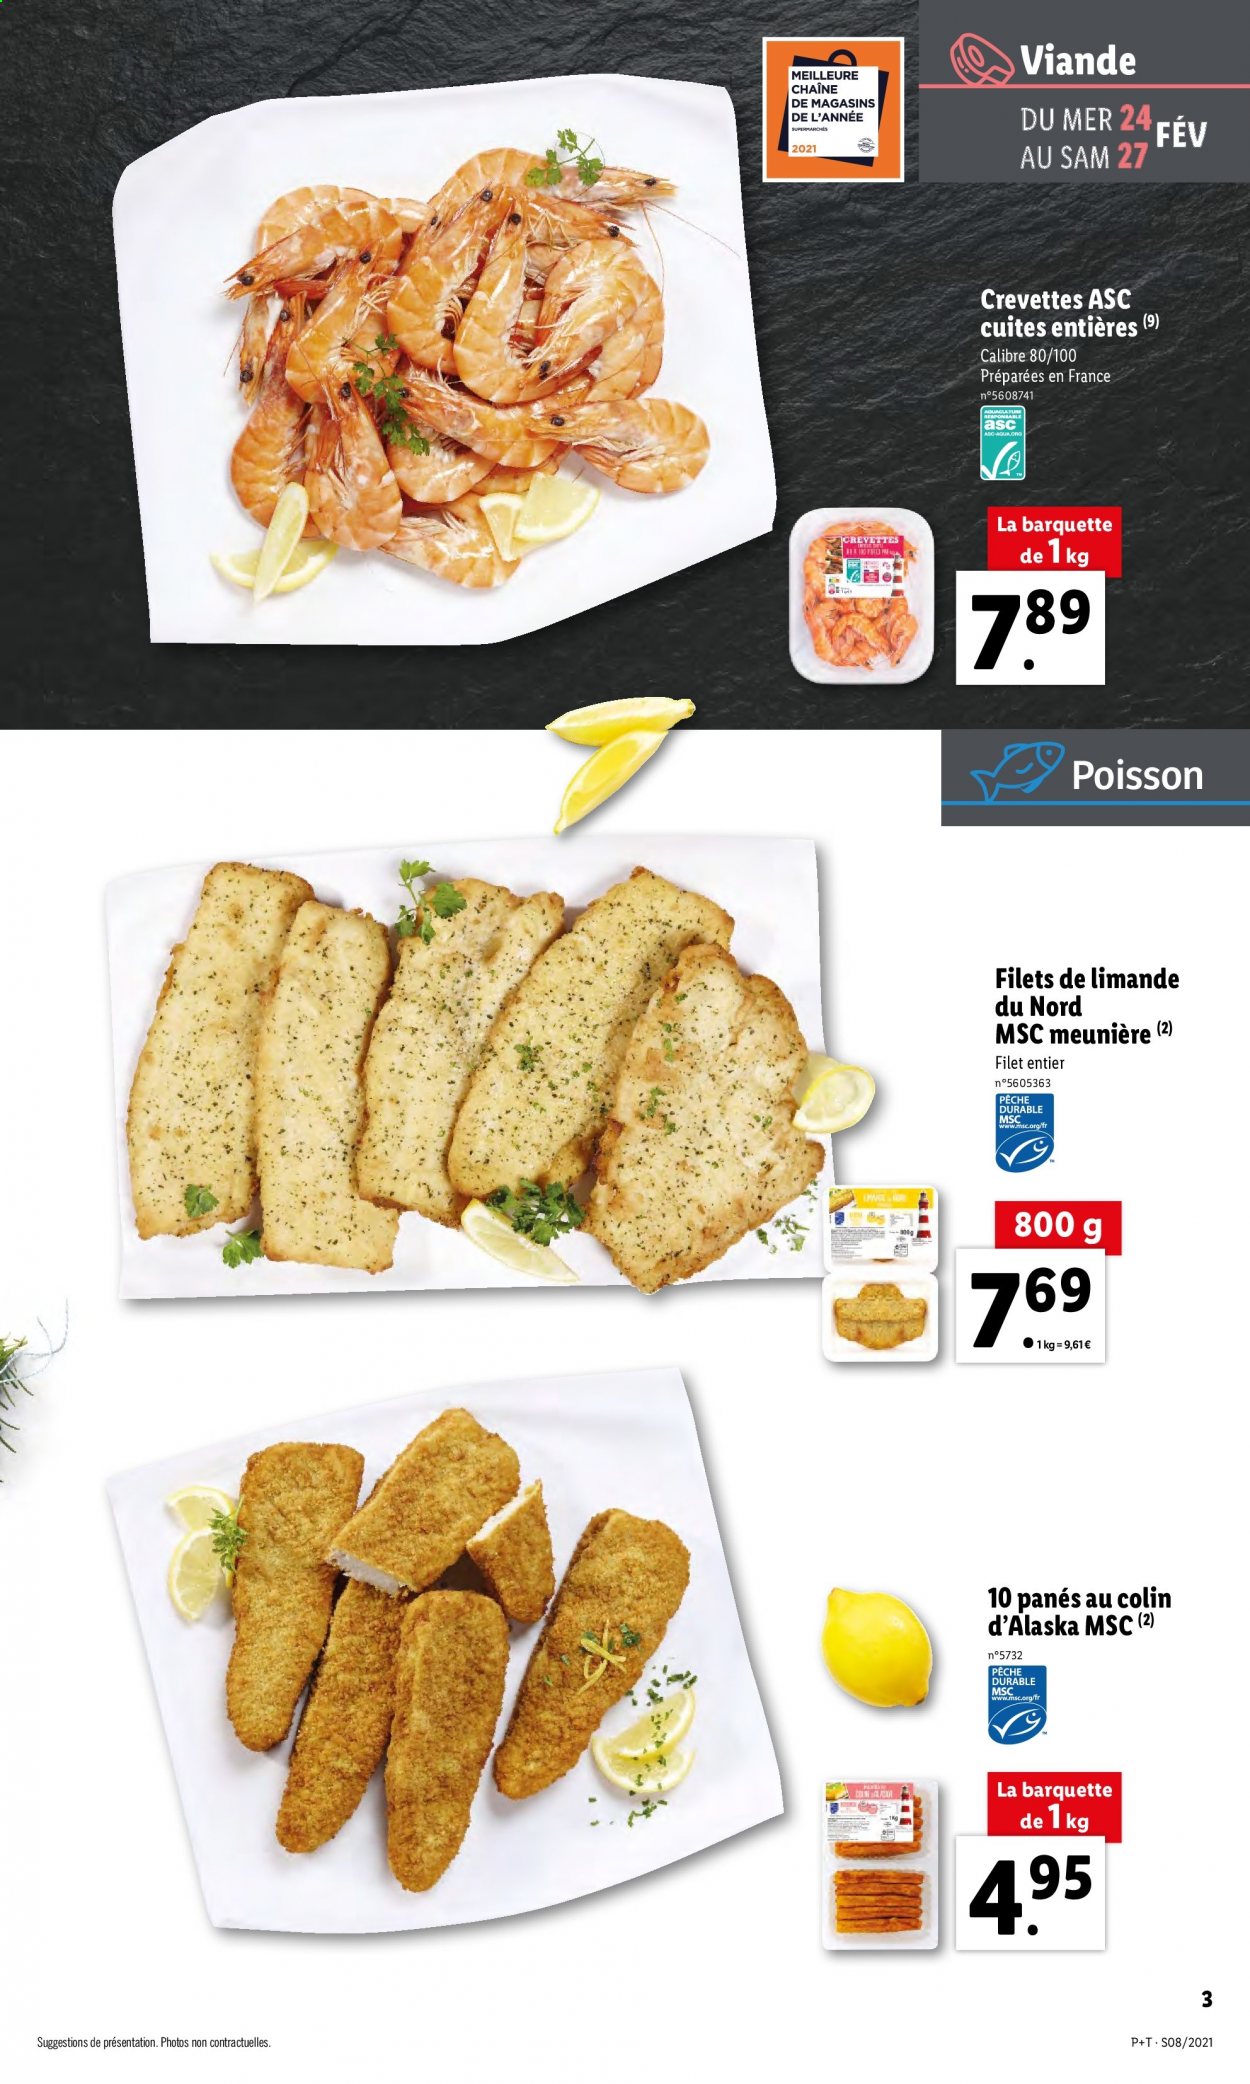 Catalogue Lidl - 24.02.2021 - 02.03.2021. Page 3.